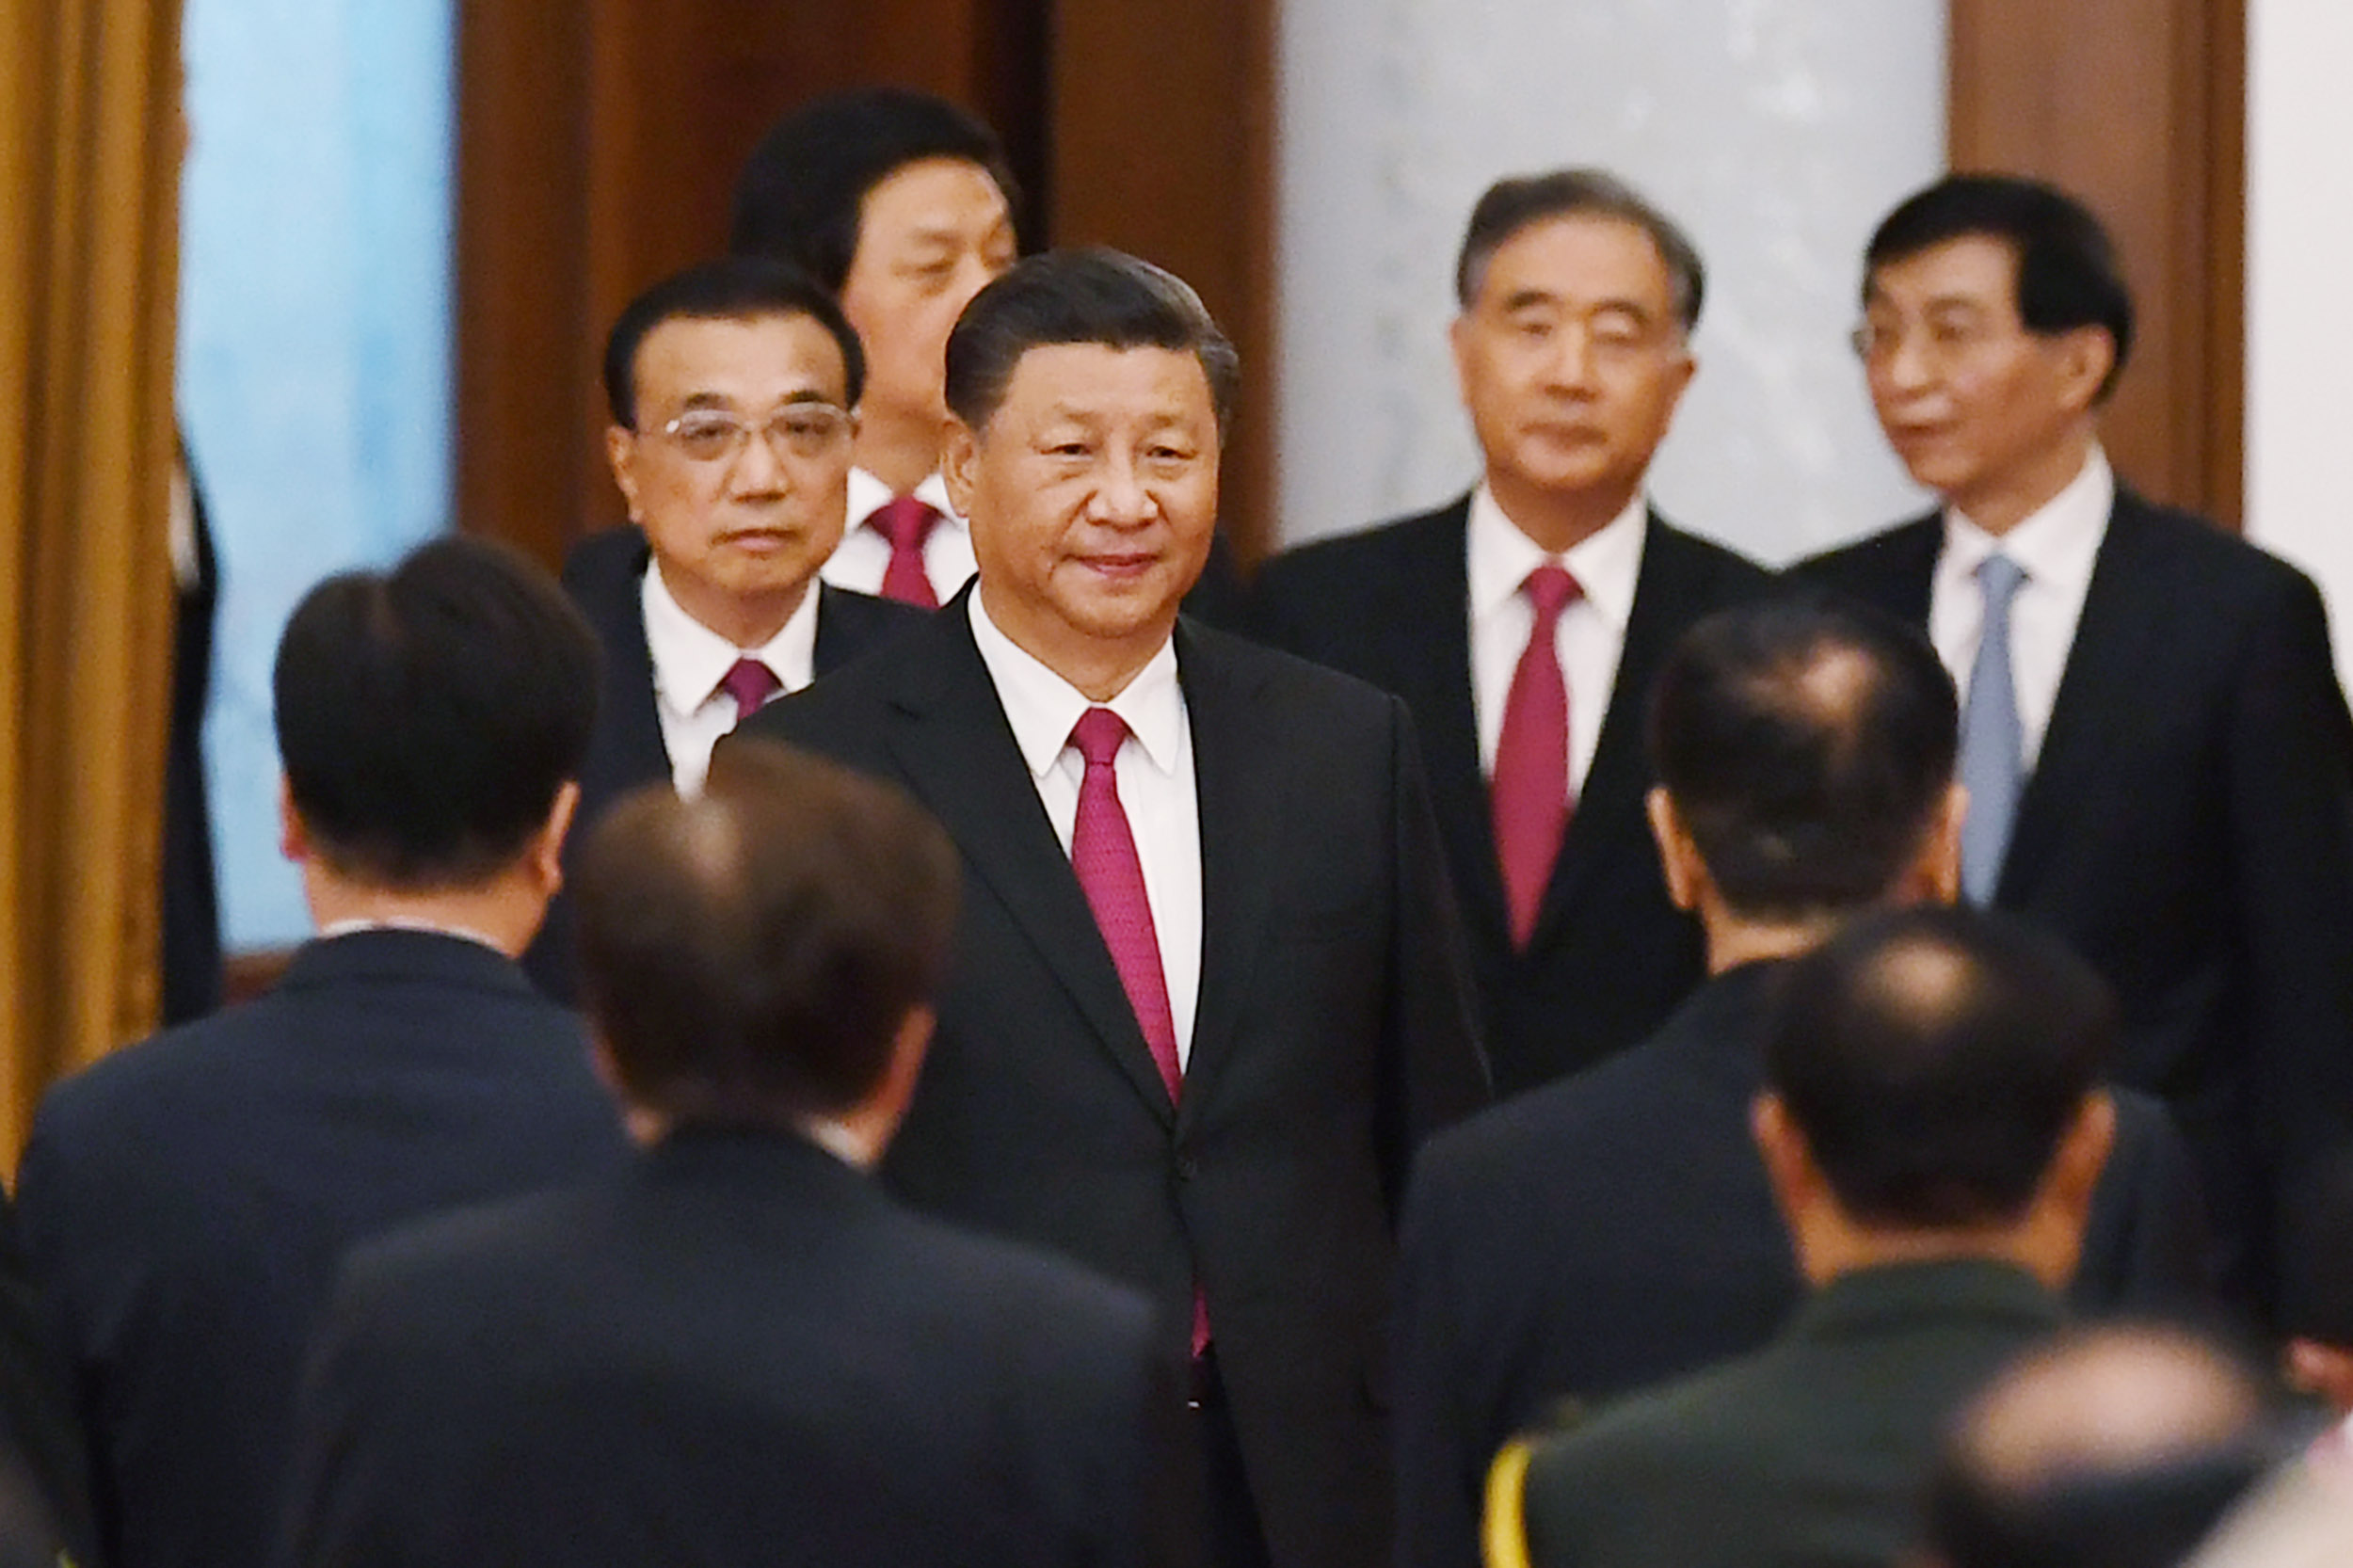 Chinese President Xi Jinping (C) arrives with Premier Li Keqiang (L) for a reception at the Great Hall of the People on the eve of China's National Day, on September 30. 